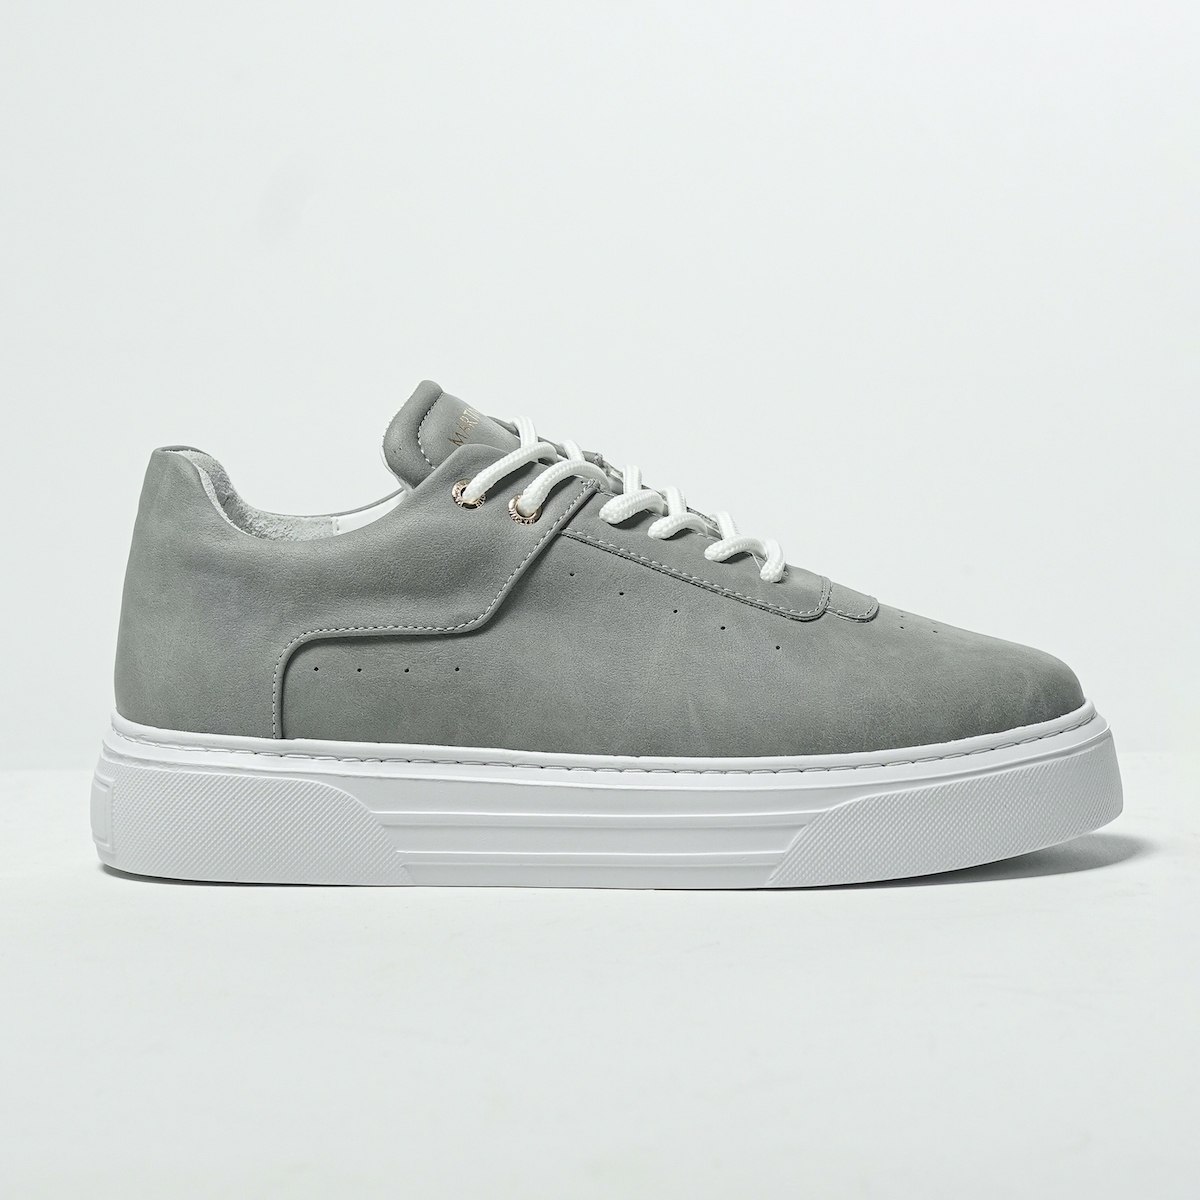 Men’s Casual Sneakers Breathable Shoes Gray